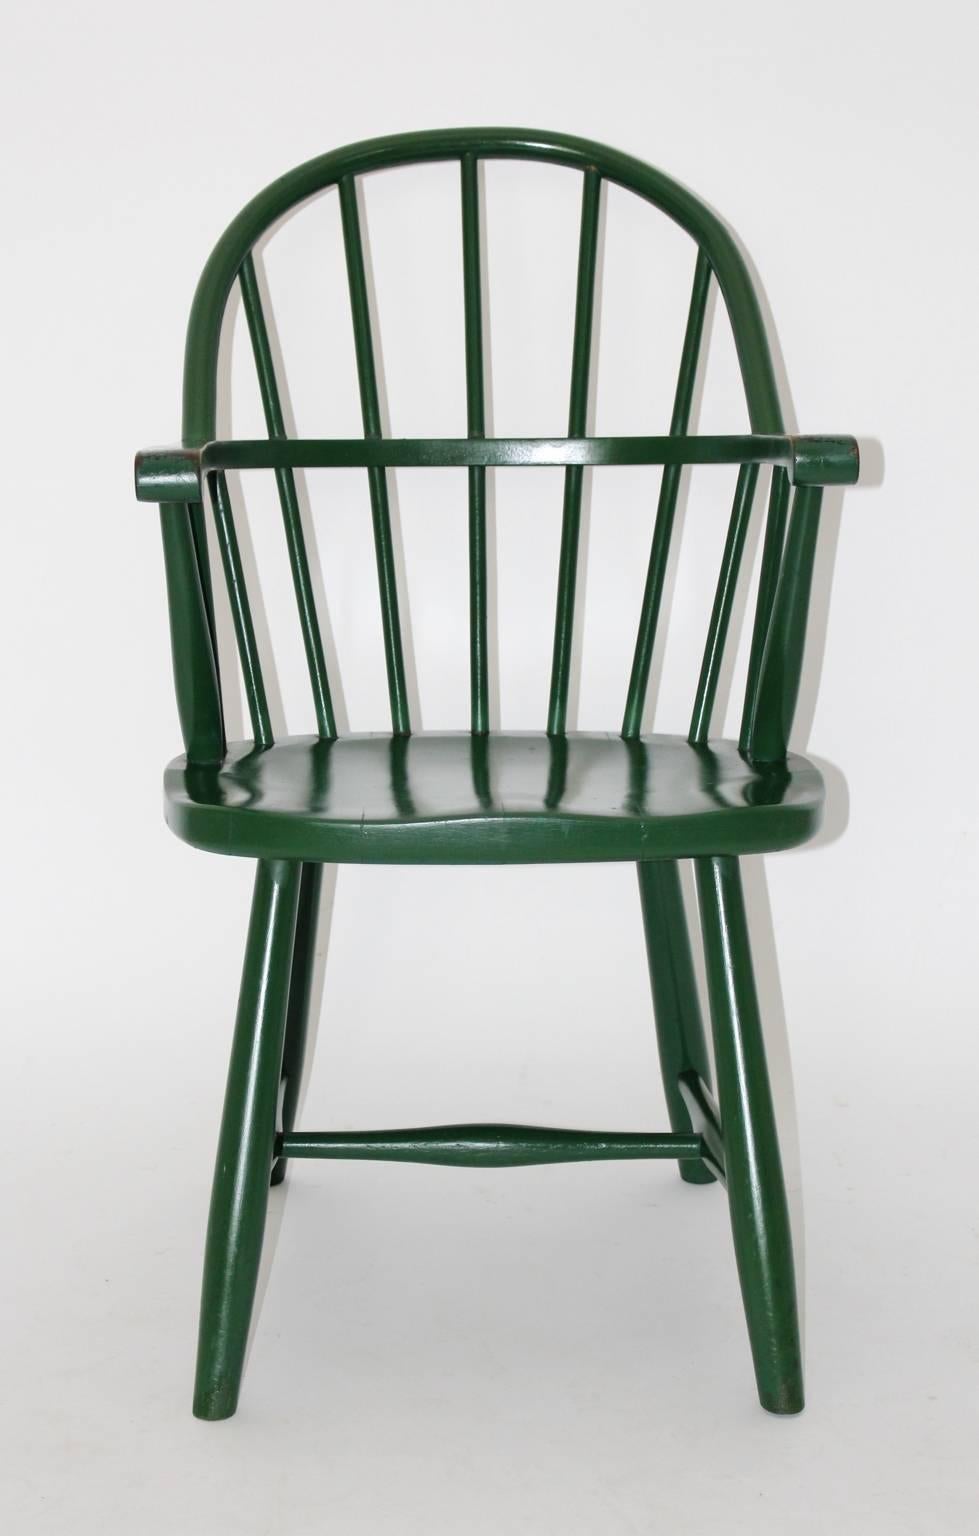 The set of five armchairs was made of green lacquered beechwood and shows a very good original vintage condition.
Josef Frank designed this type of windsor chair for his interior firm Haus und Garten circa 1925.
Also this type of windsor chair was